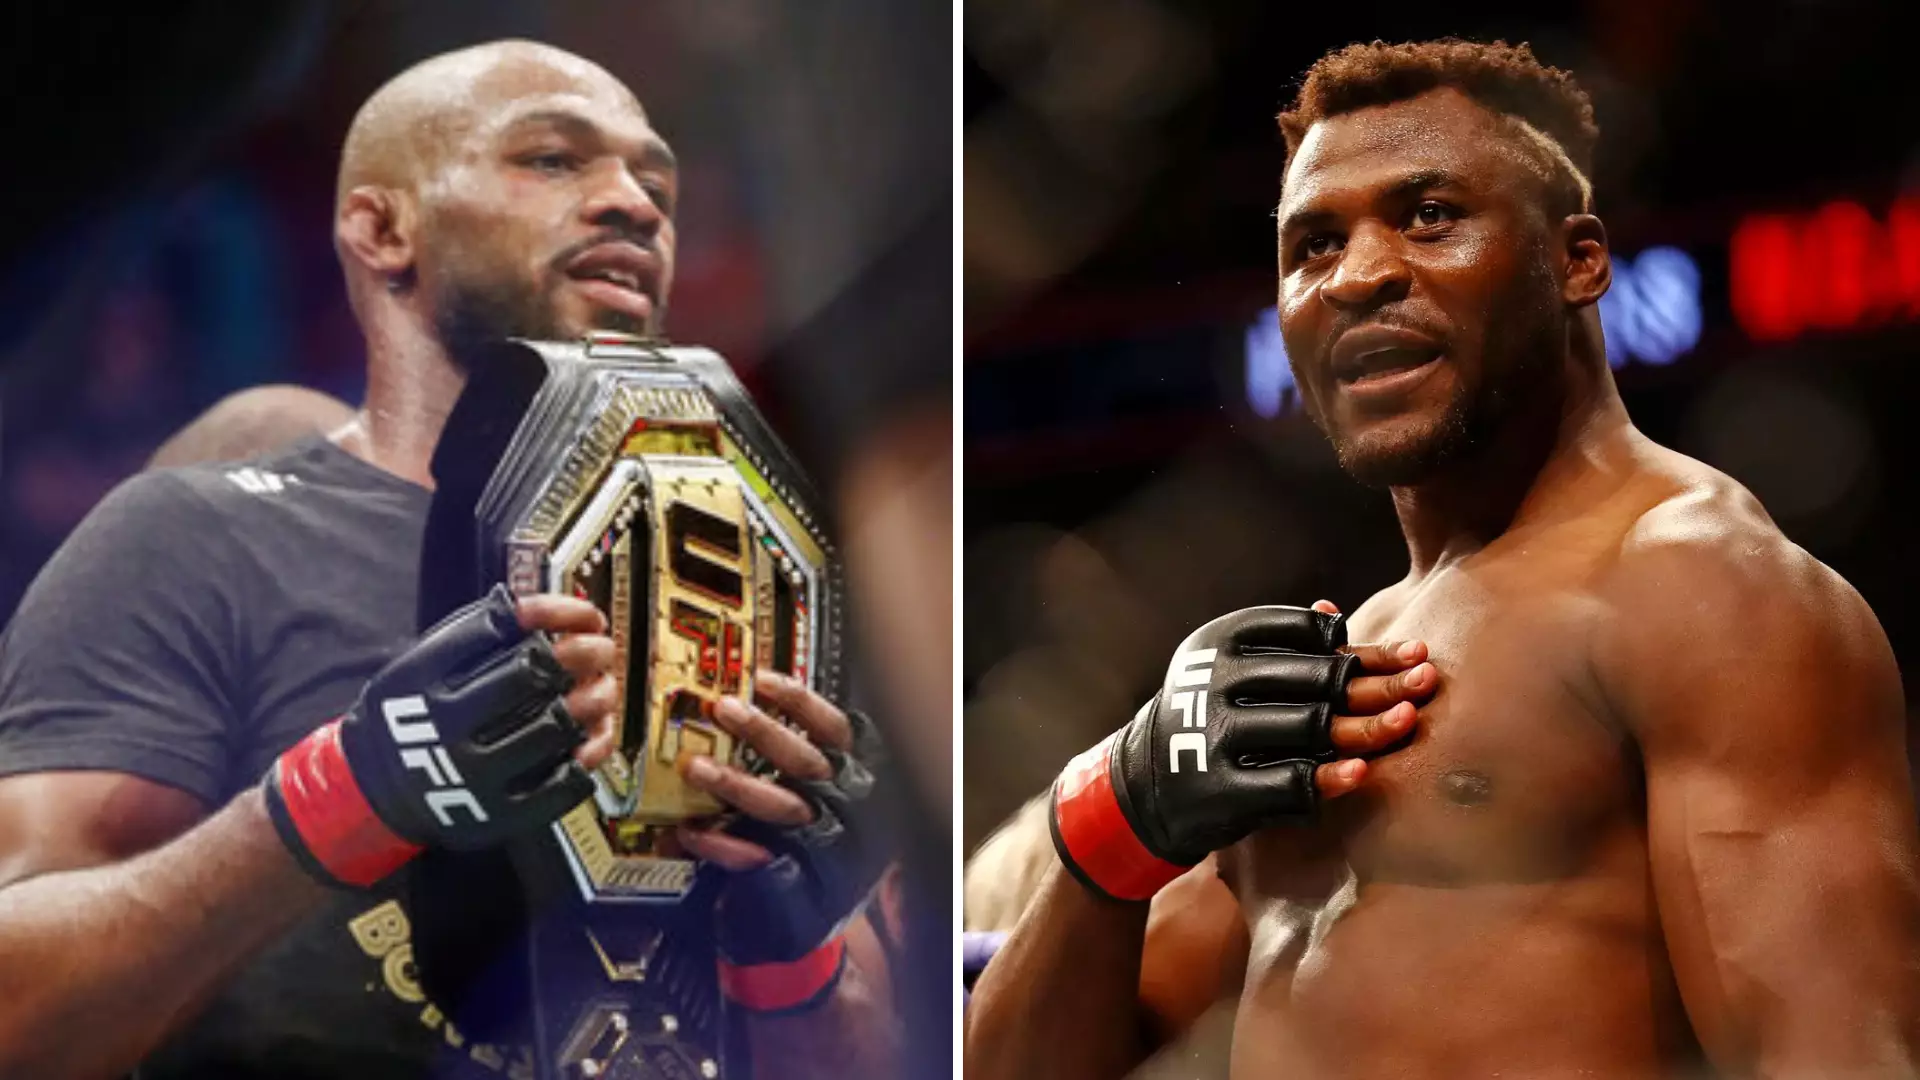 Francis Ngannou Responds To Jon Jones Over Potential Move Up To Heavyweight Class